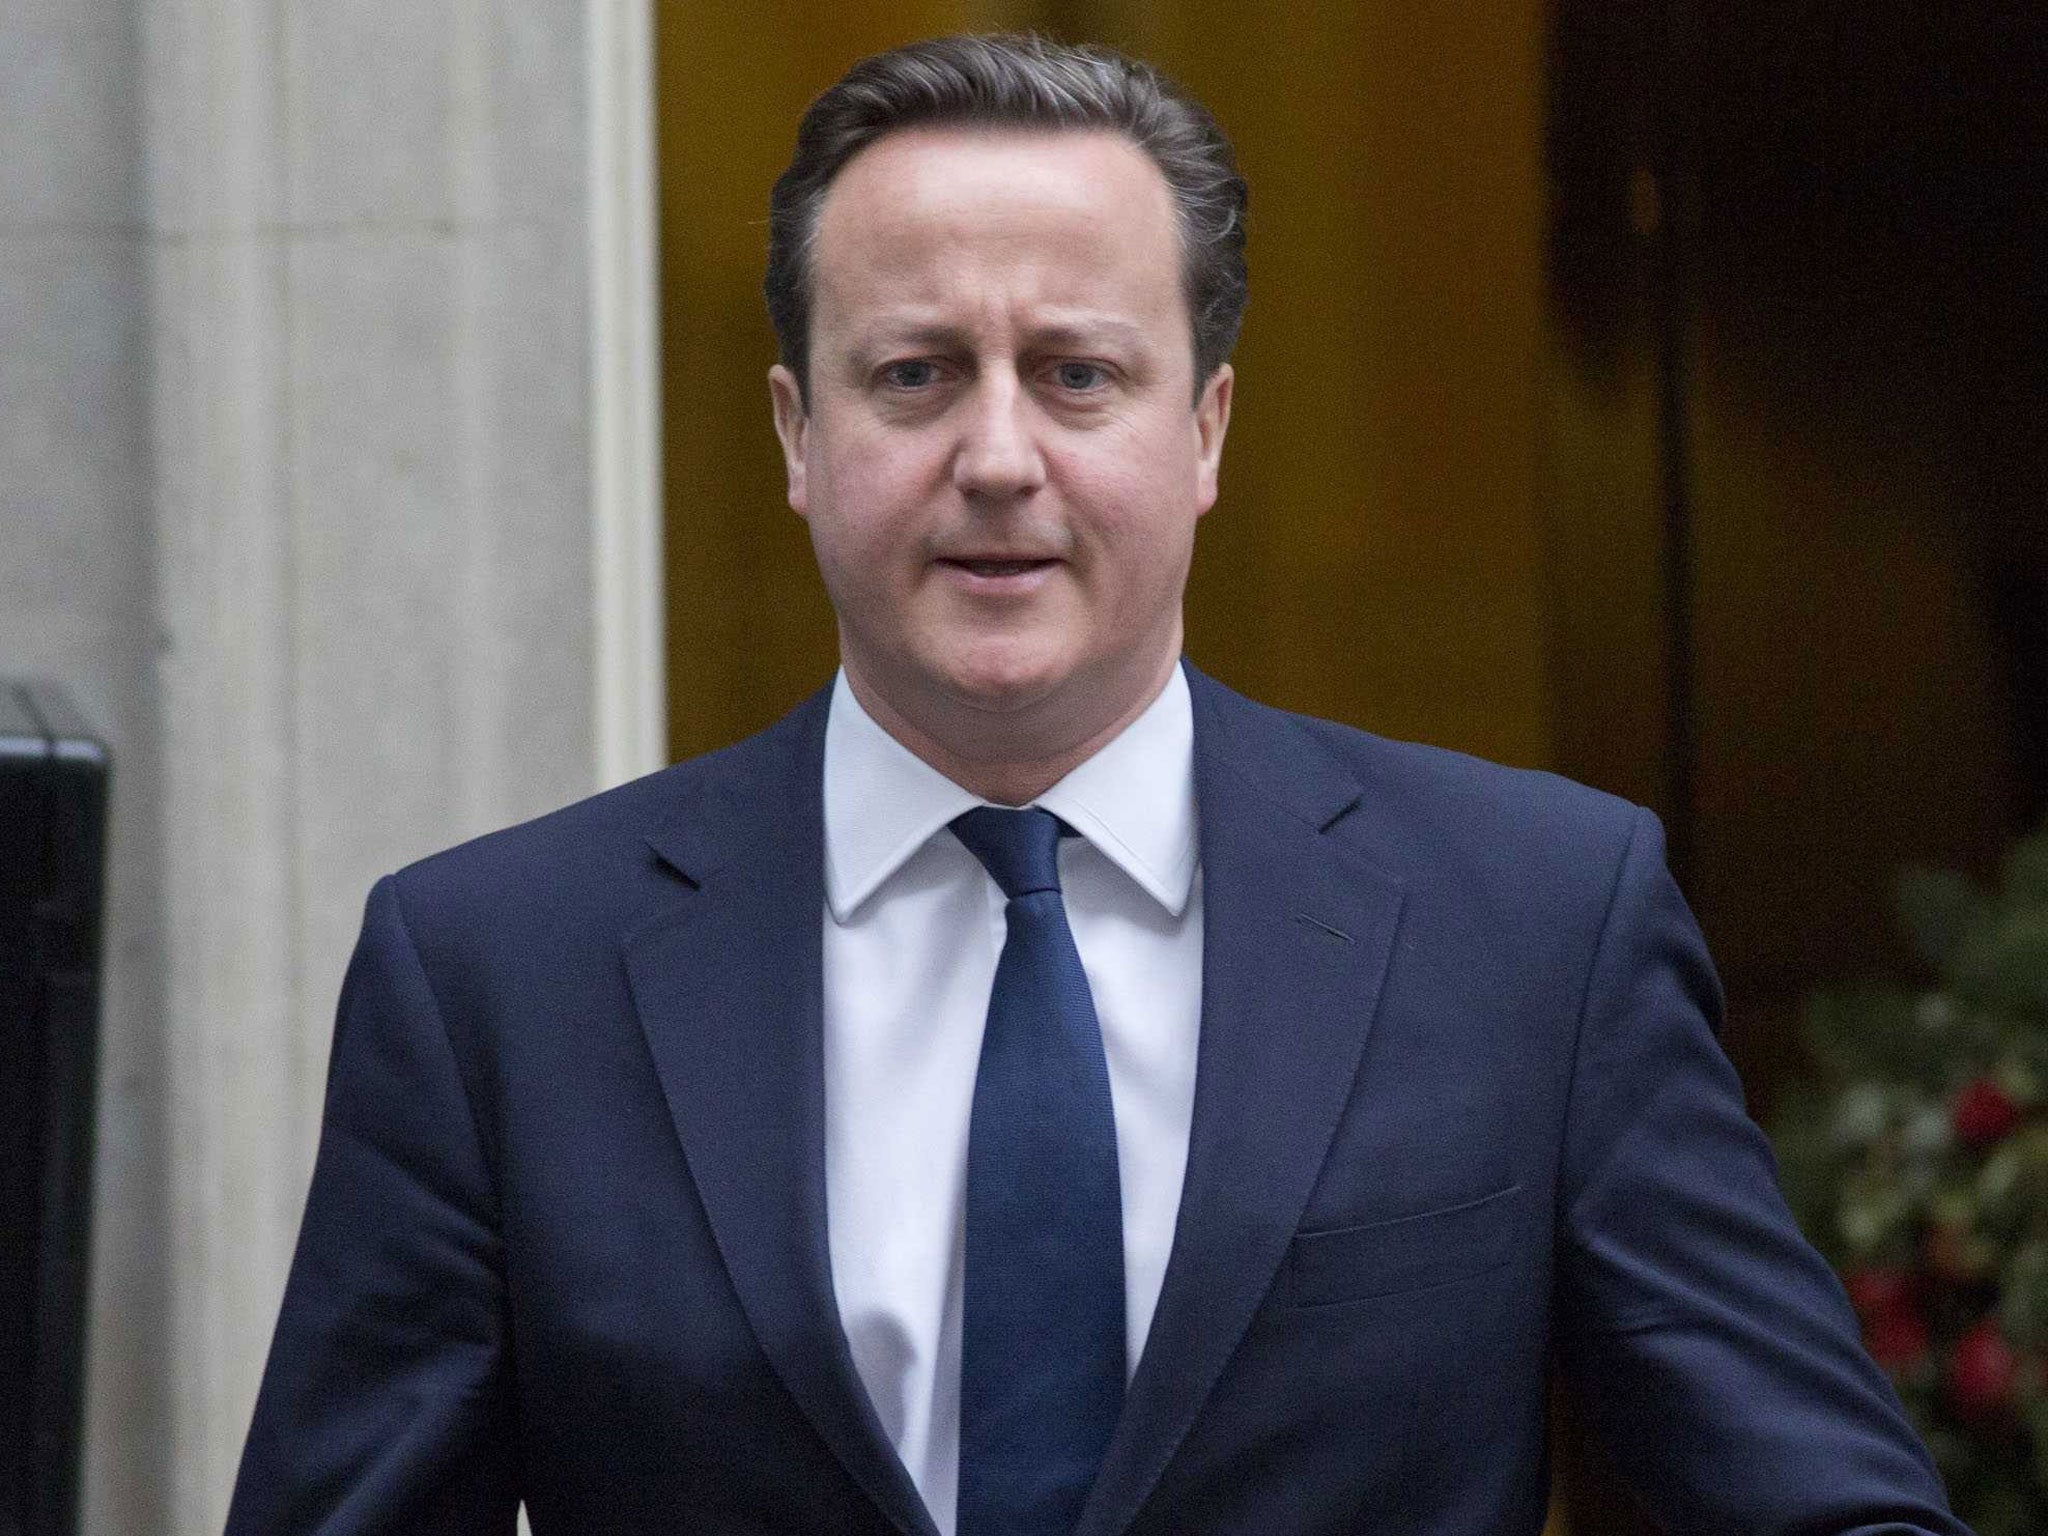 David Cameron today used his New Year's message to declare that Britain is "heading in the right direction" on all the big issues and can look forward to 2013 with "realism and optimism".